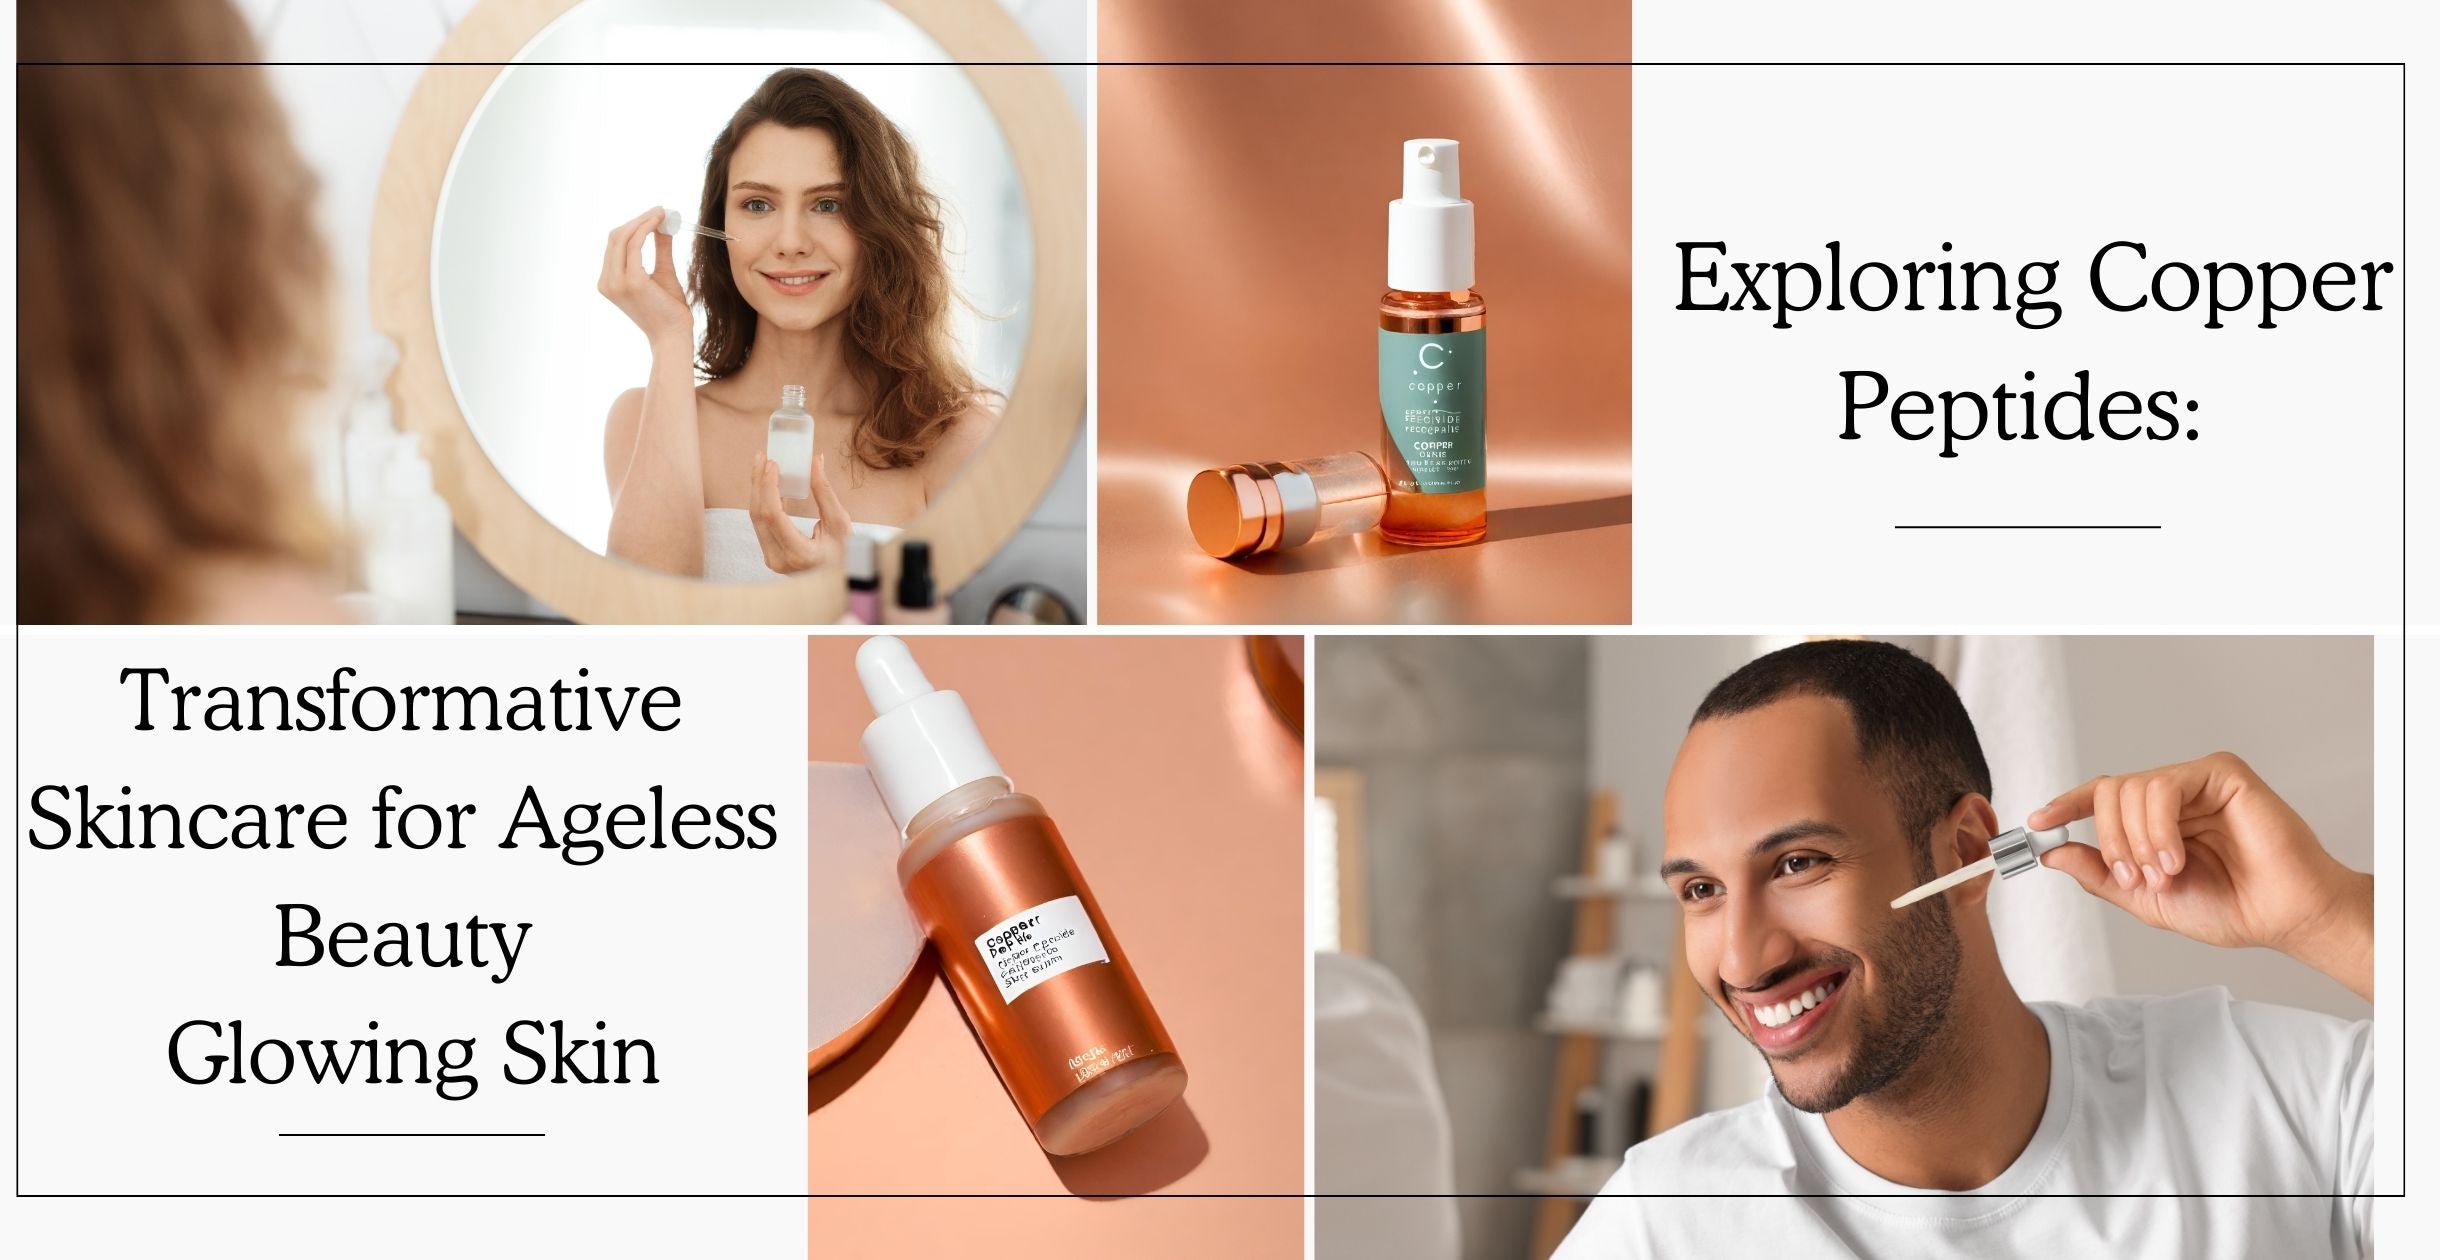 Exploring Copper Peptides: Transformative Skincare for Ageless Beauty